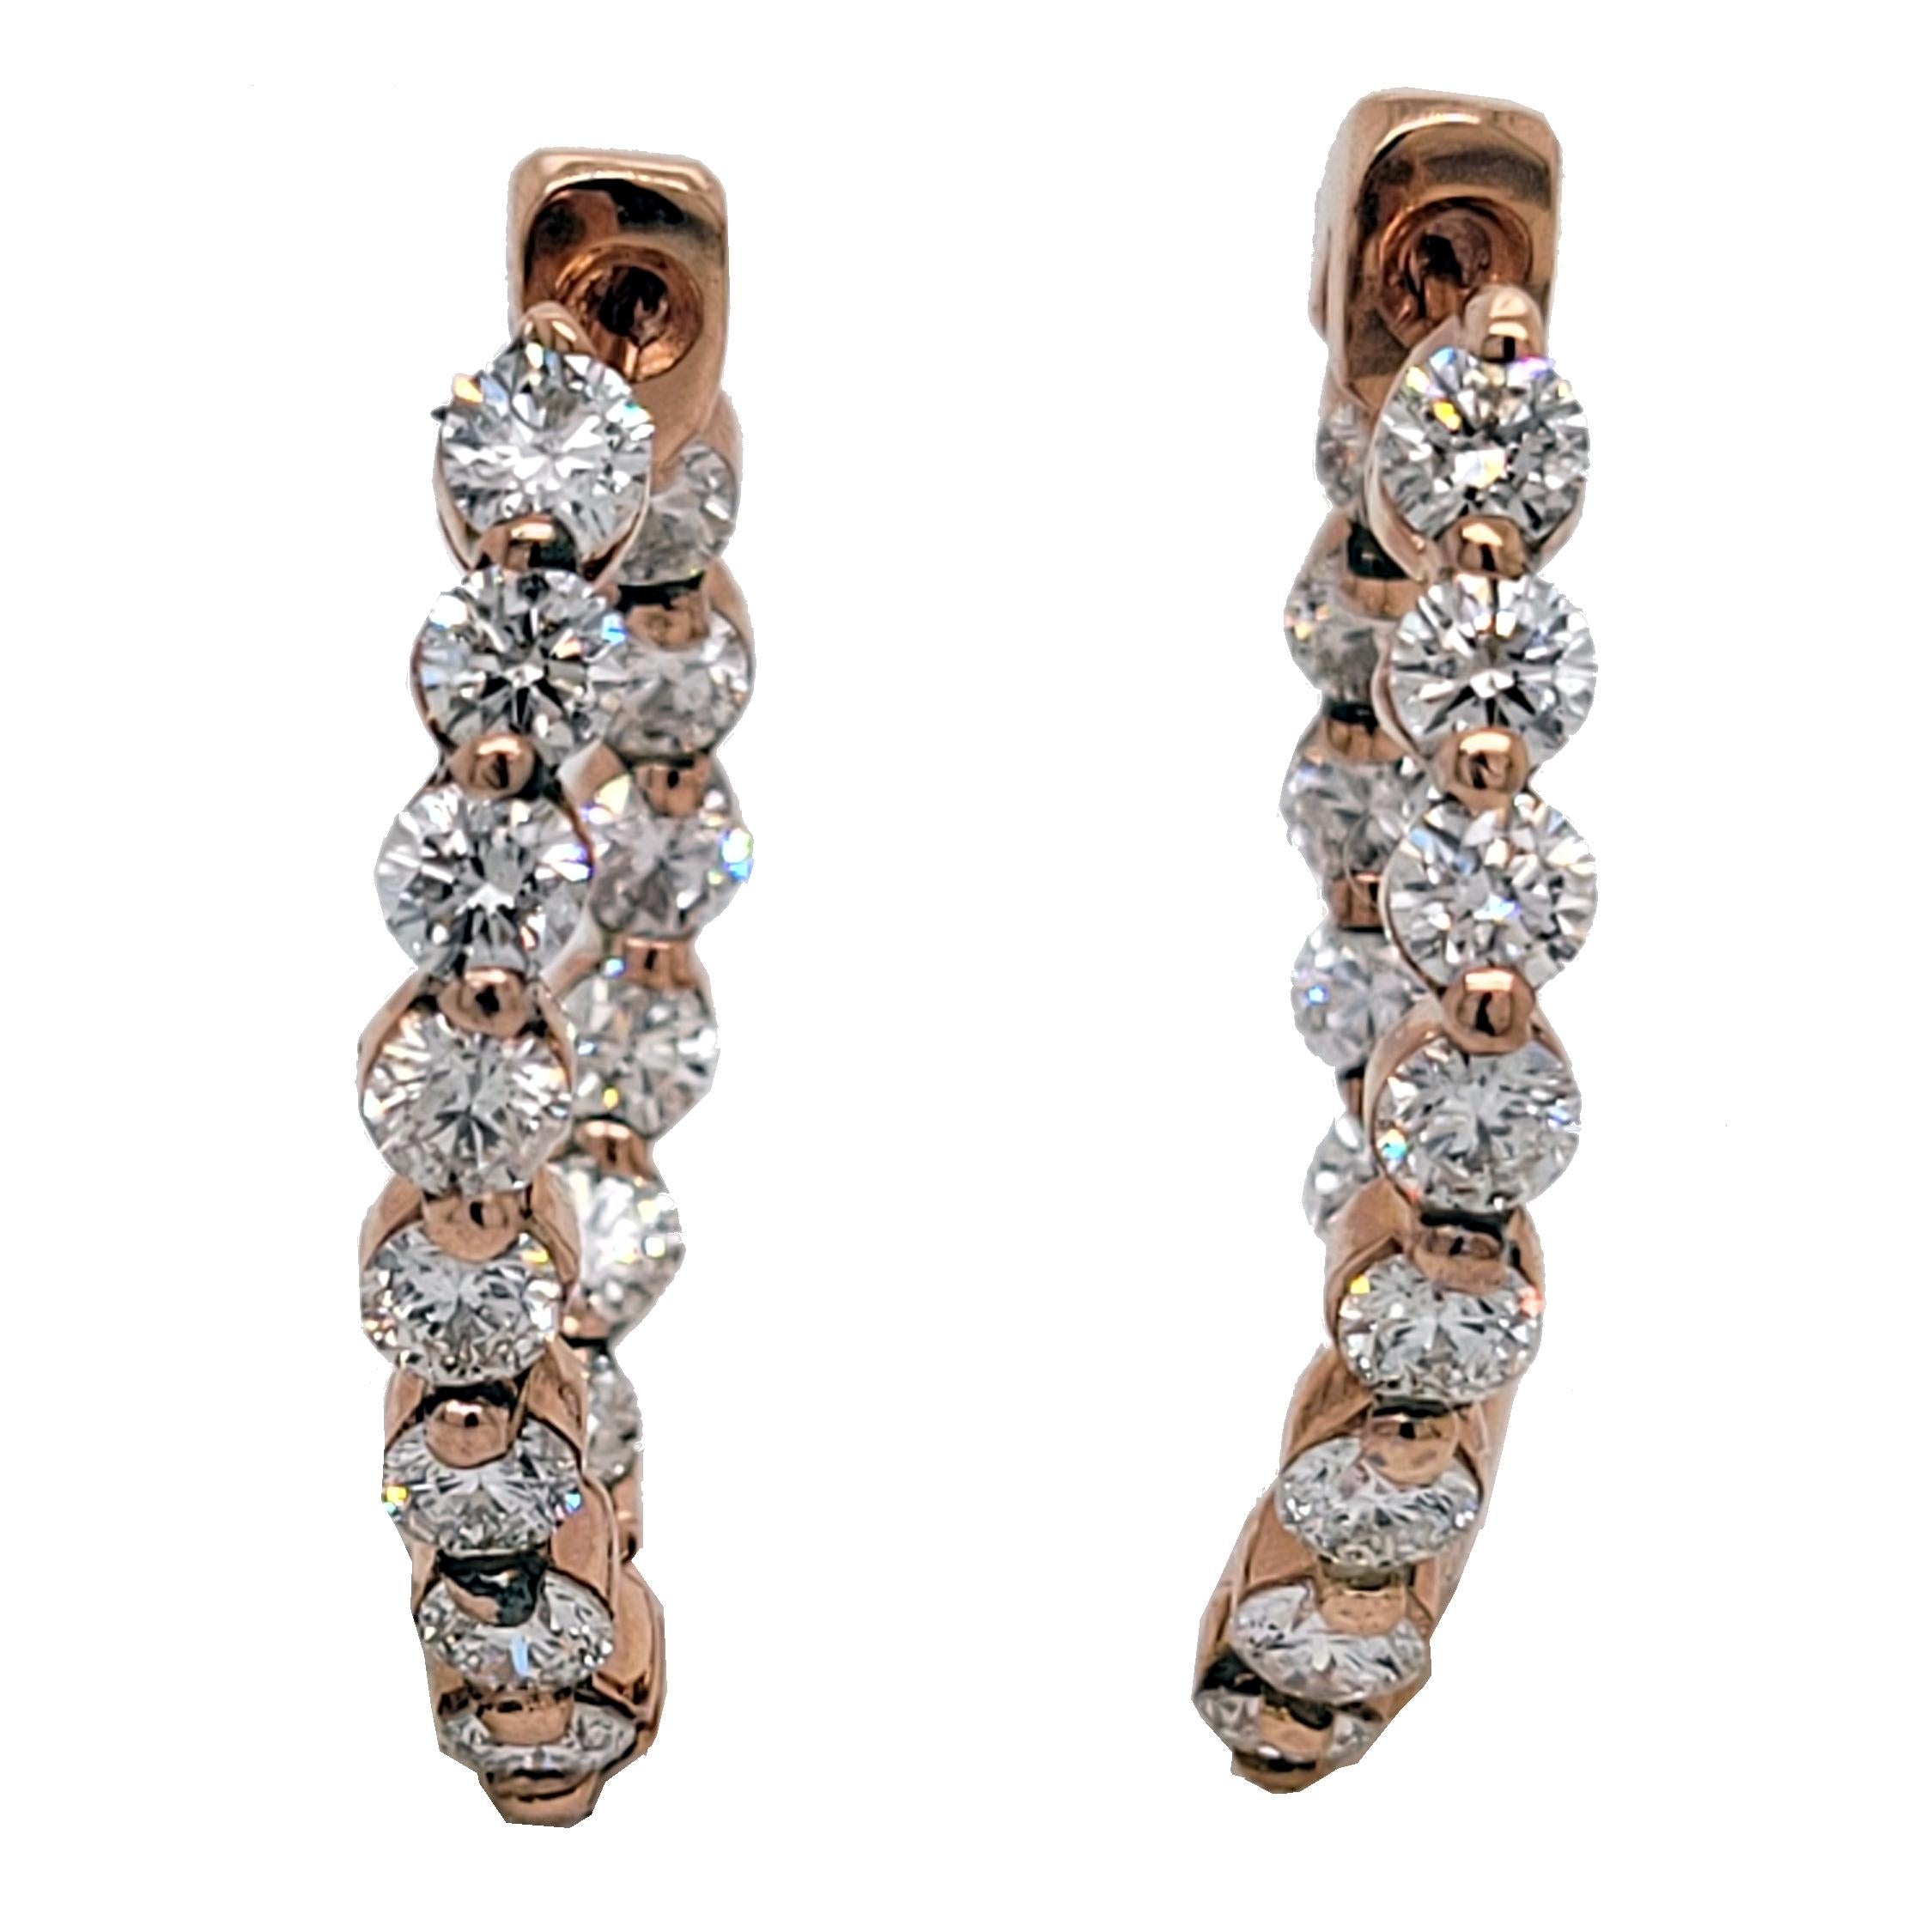 This beautiful 14K Rose Gold Inside/Outside hoop earrings has 28 2.8mm round brilliant diamonds with total weight of 2.39 Ct set in Shared Prong style for maximum brilliance. The earring is 1 inch Long. The Earrings are designed with curvature to